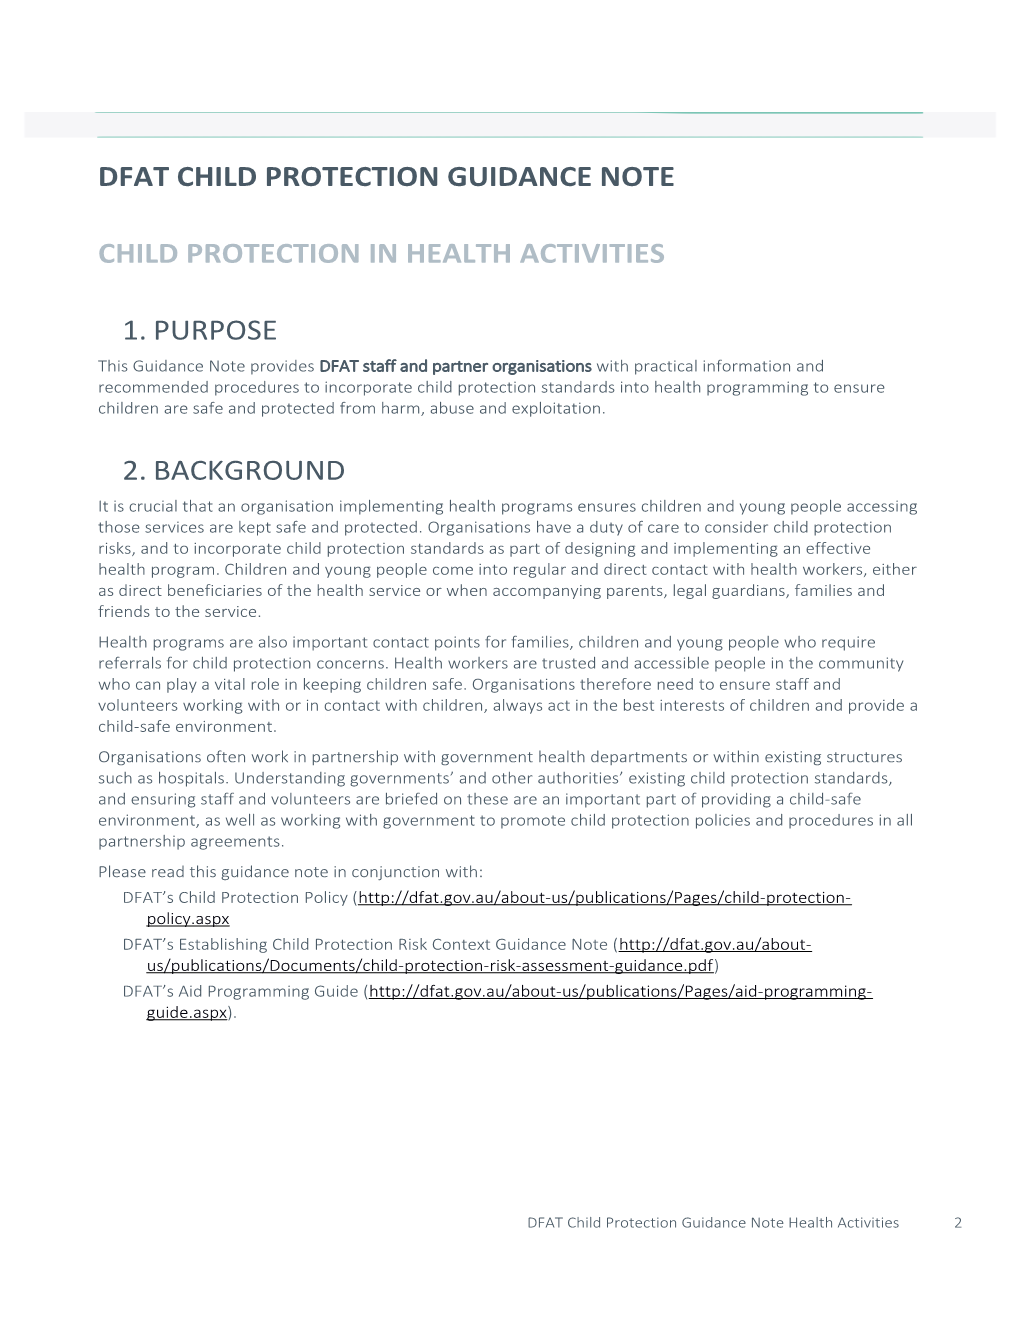 DFAT Child Protection Guidance Note Health Activities